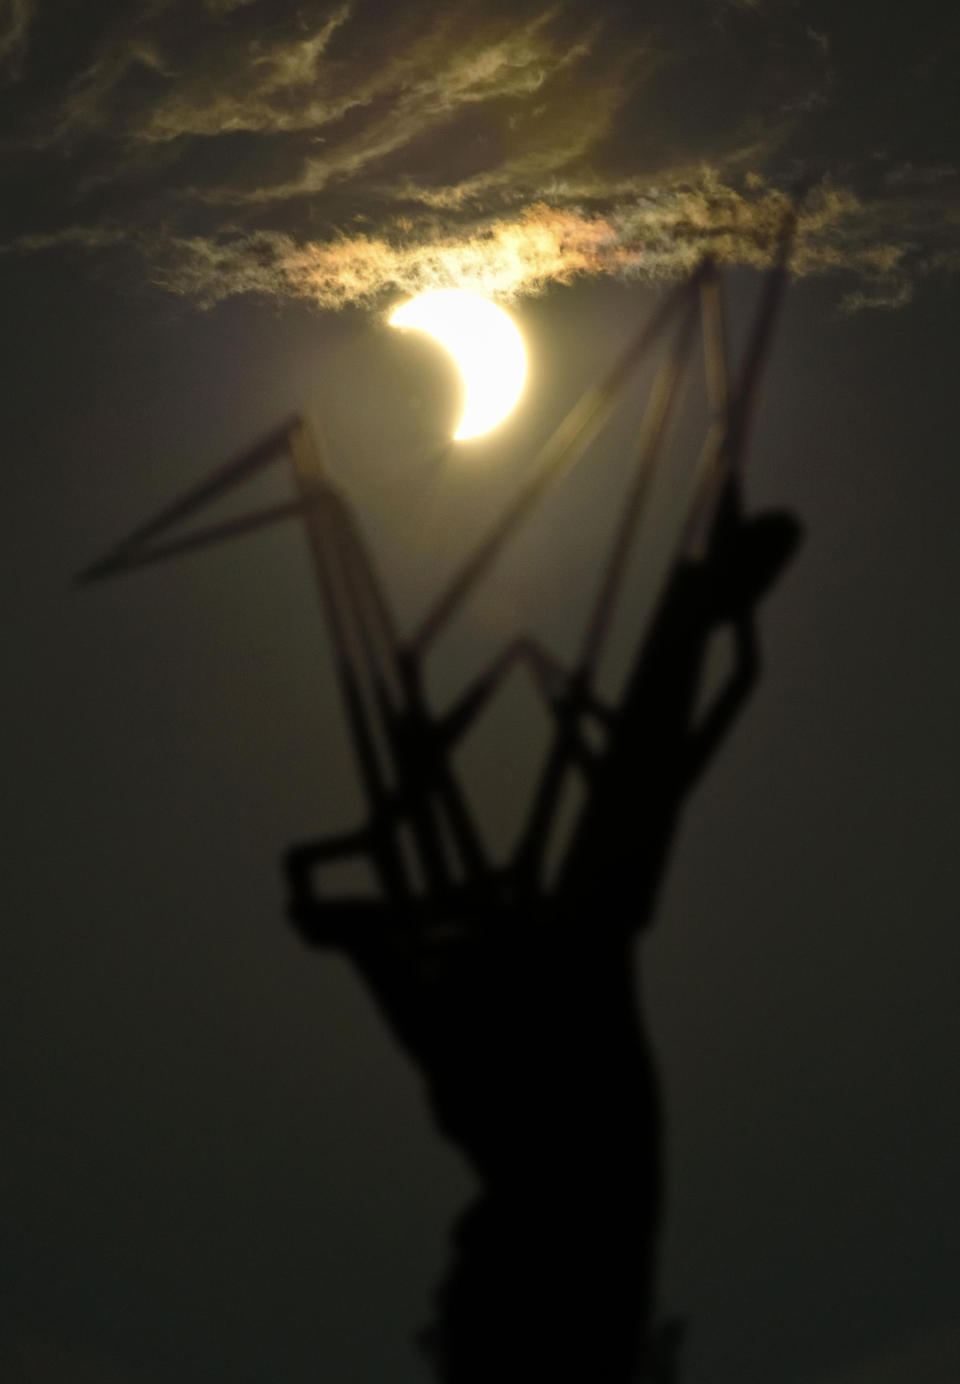 A partial solar eclipse is seen over the Children's Peace Monument at Hiroshima Peace Memorial Park in Hiroshima, western Japan Sunday, June 21, 2020. (Kyodo News via AP)